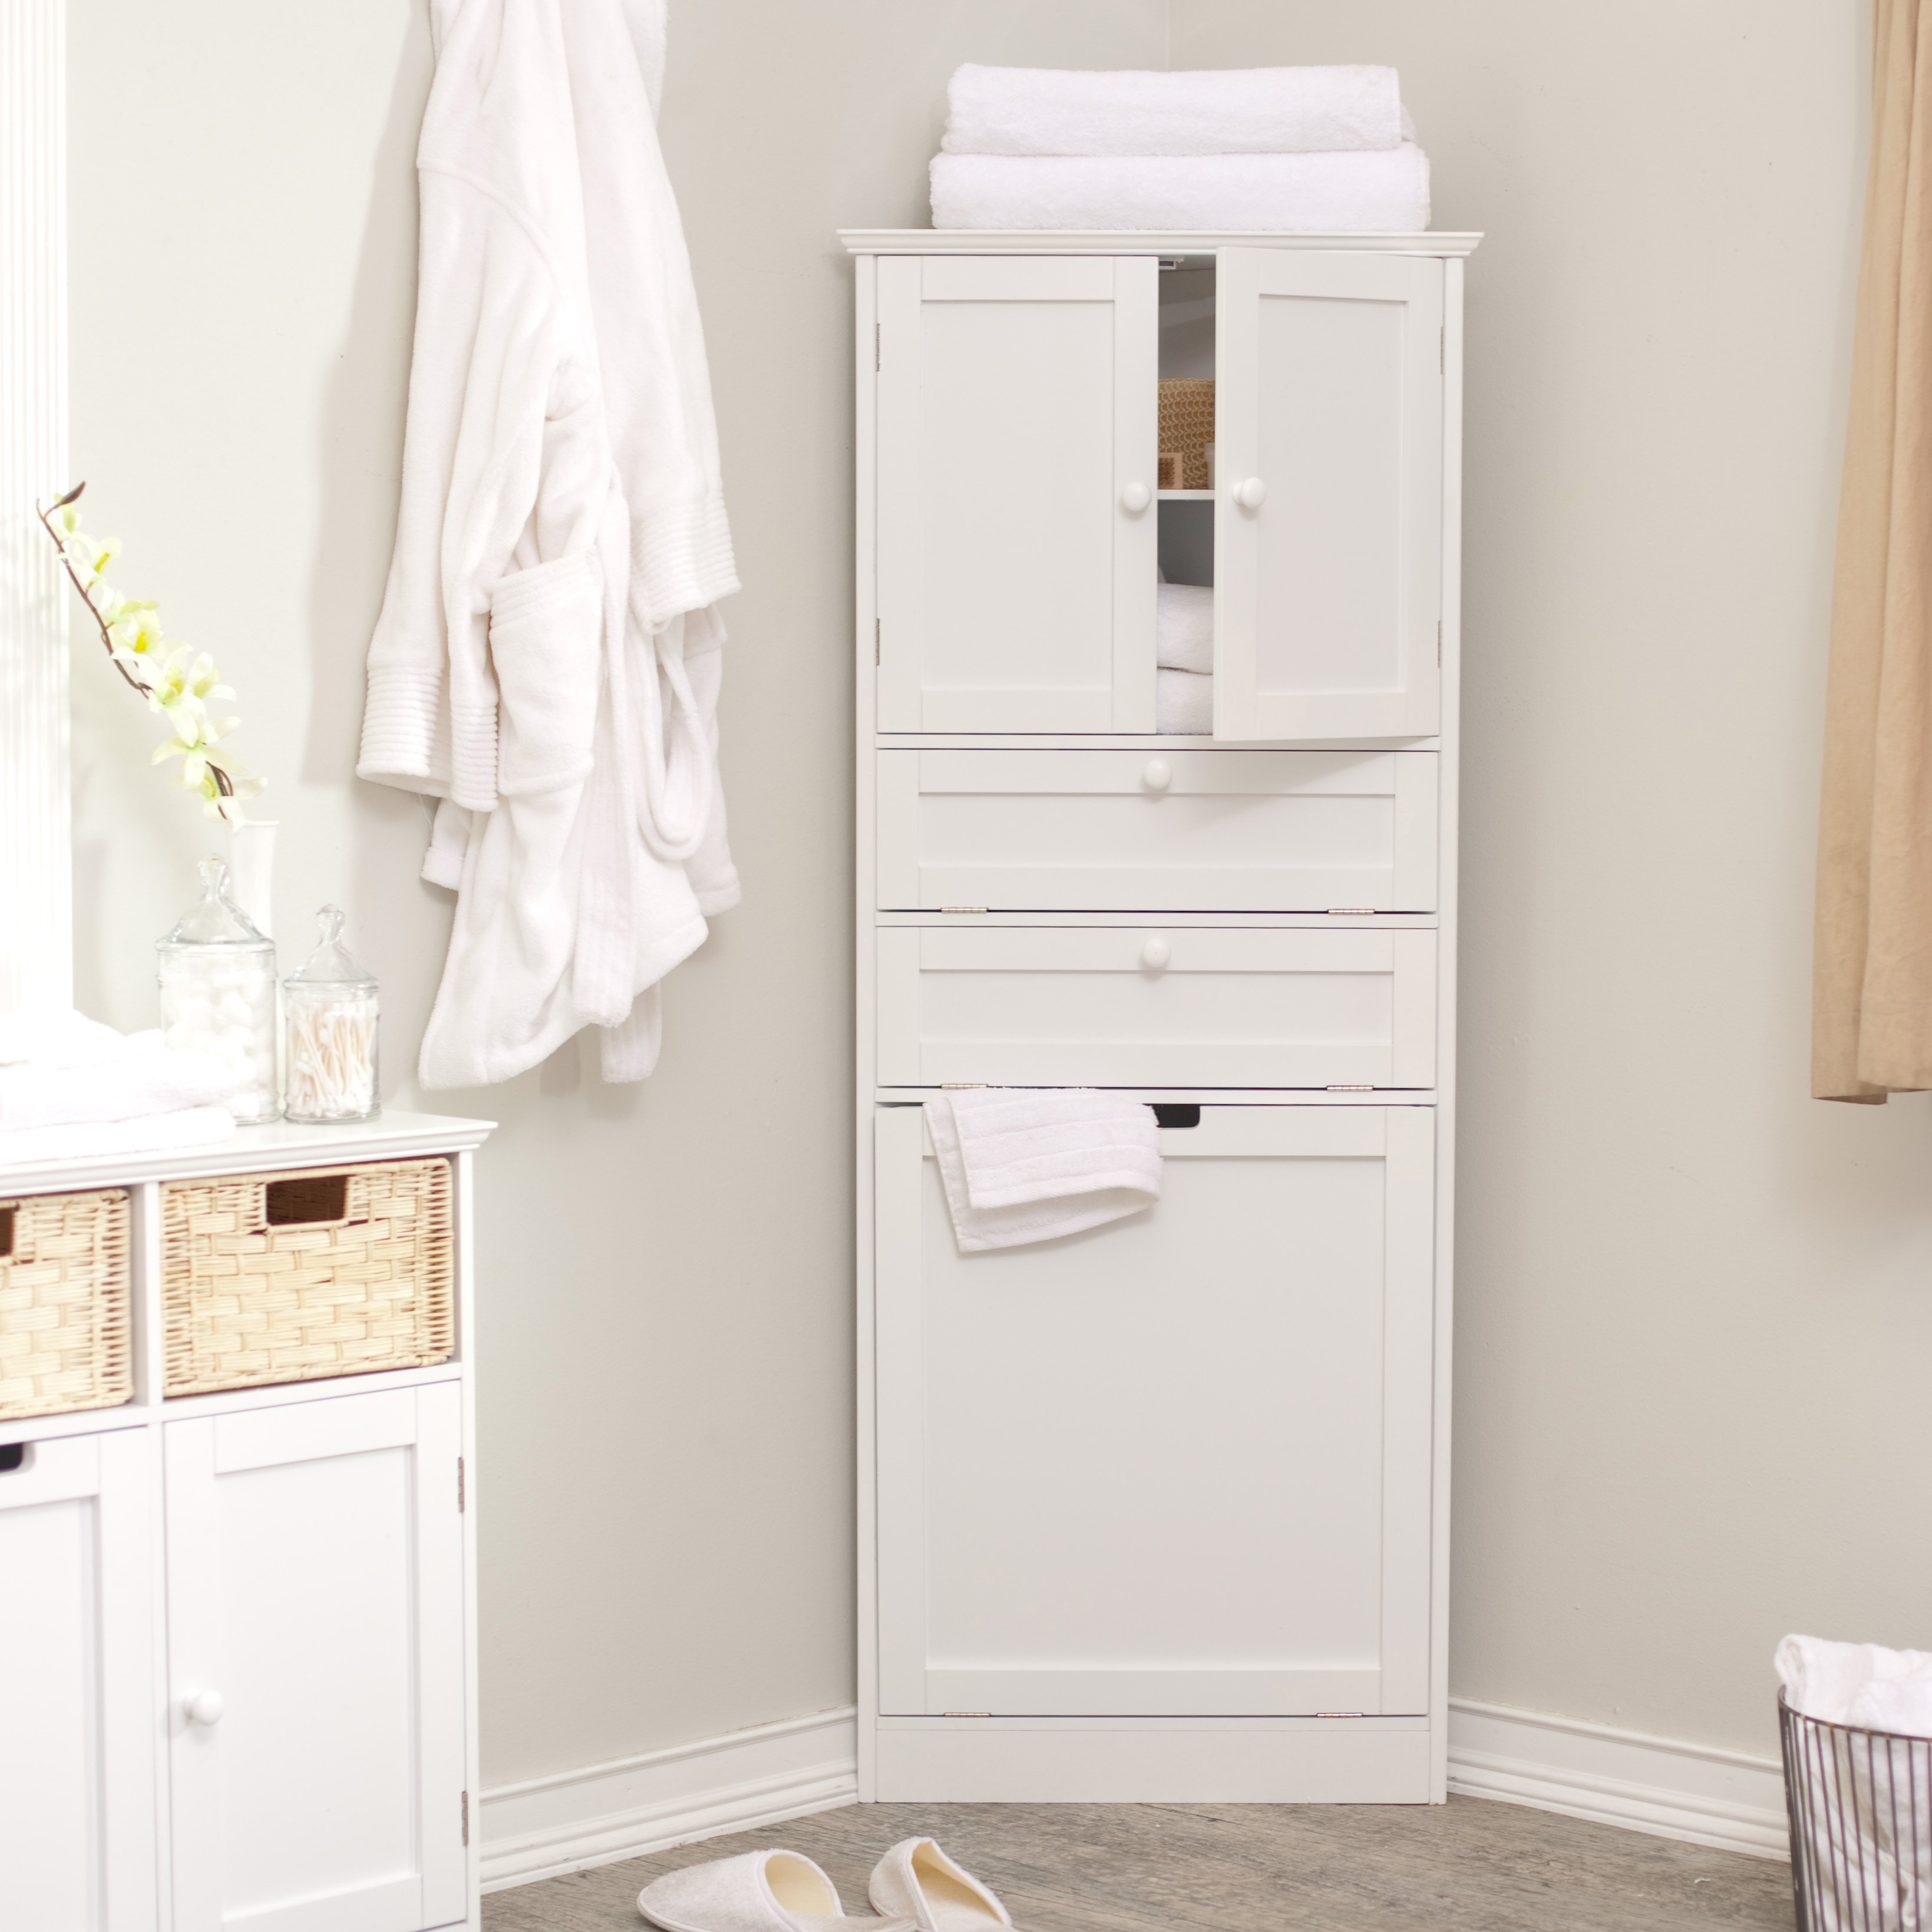 Bathroom Corner Cabinets The New Way Home Decor Enhance The intended for size 3279 X 3279